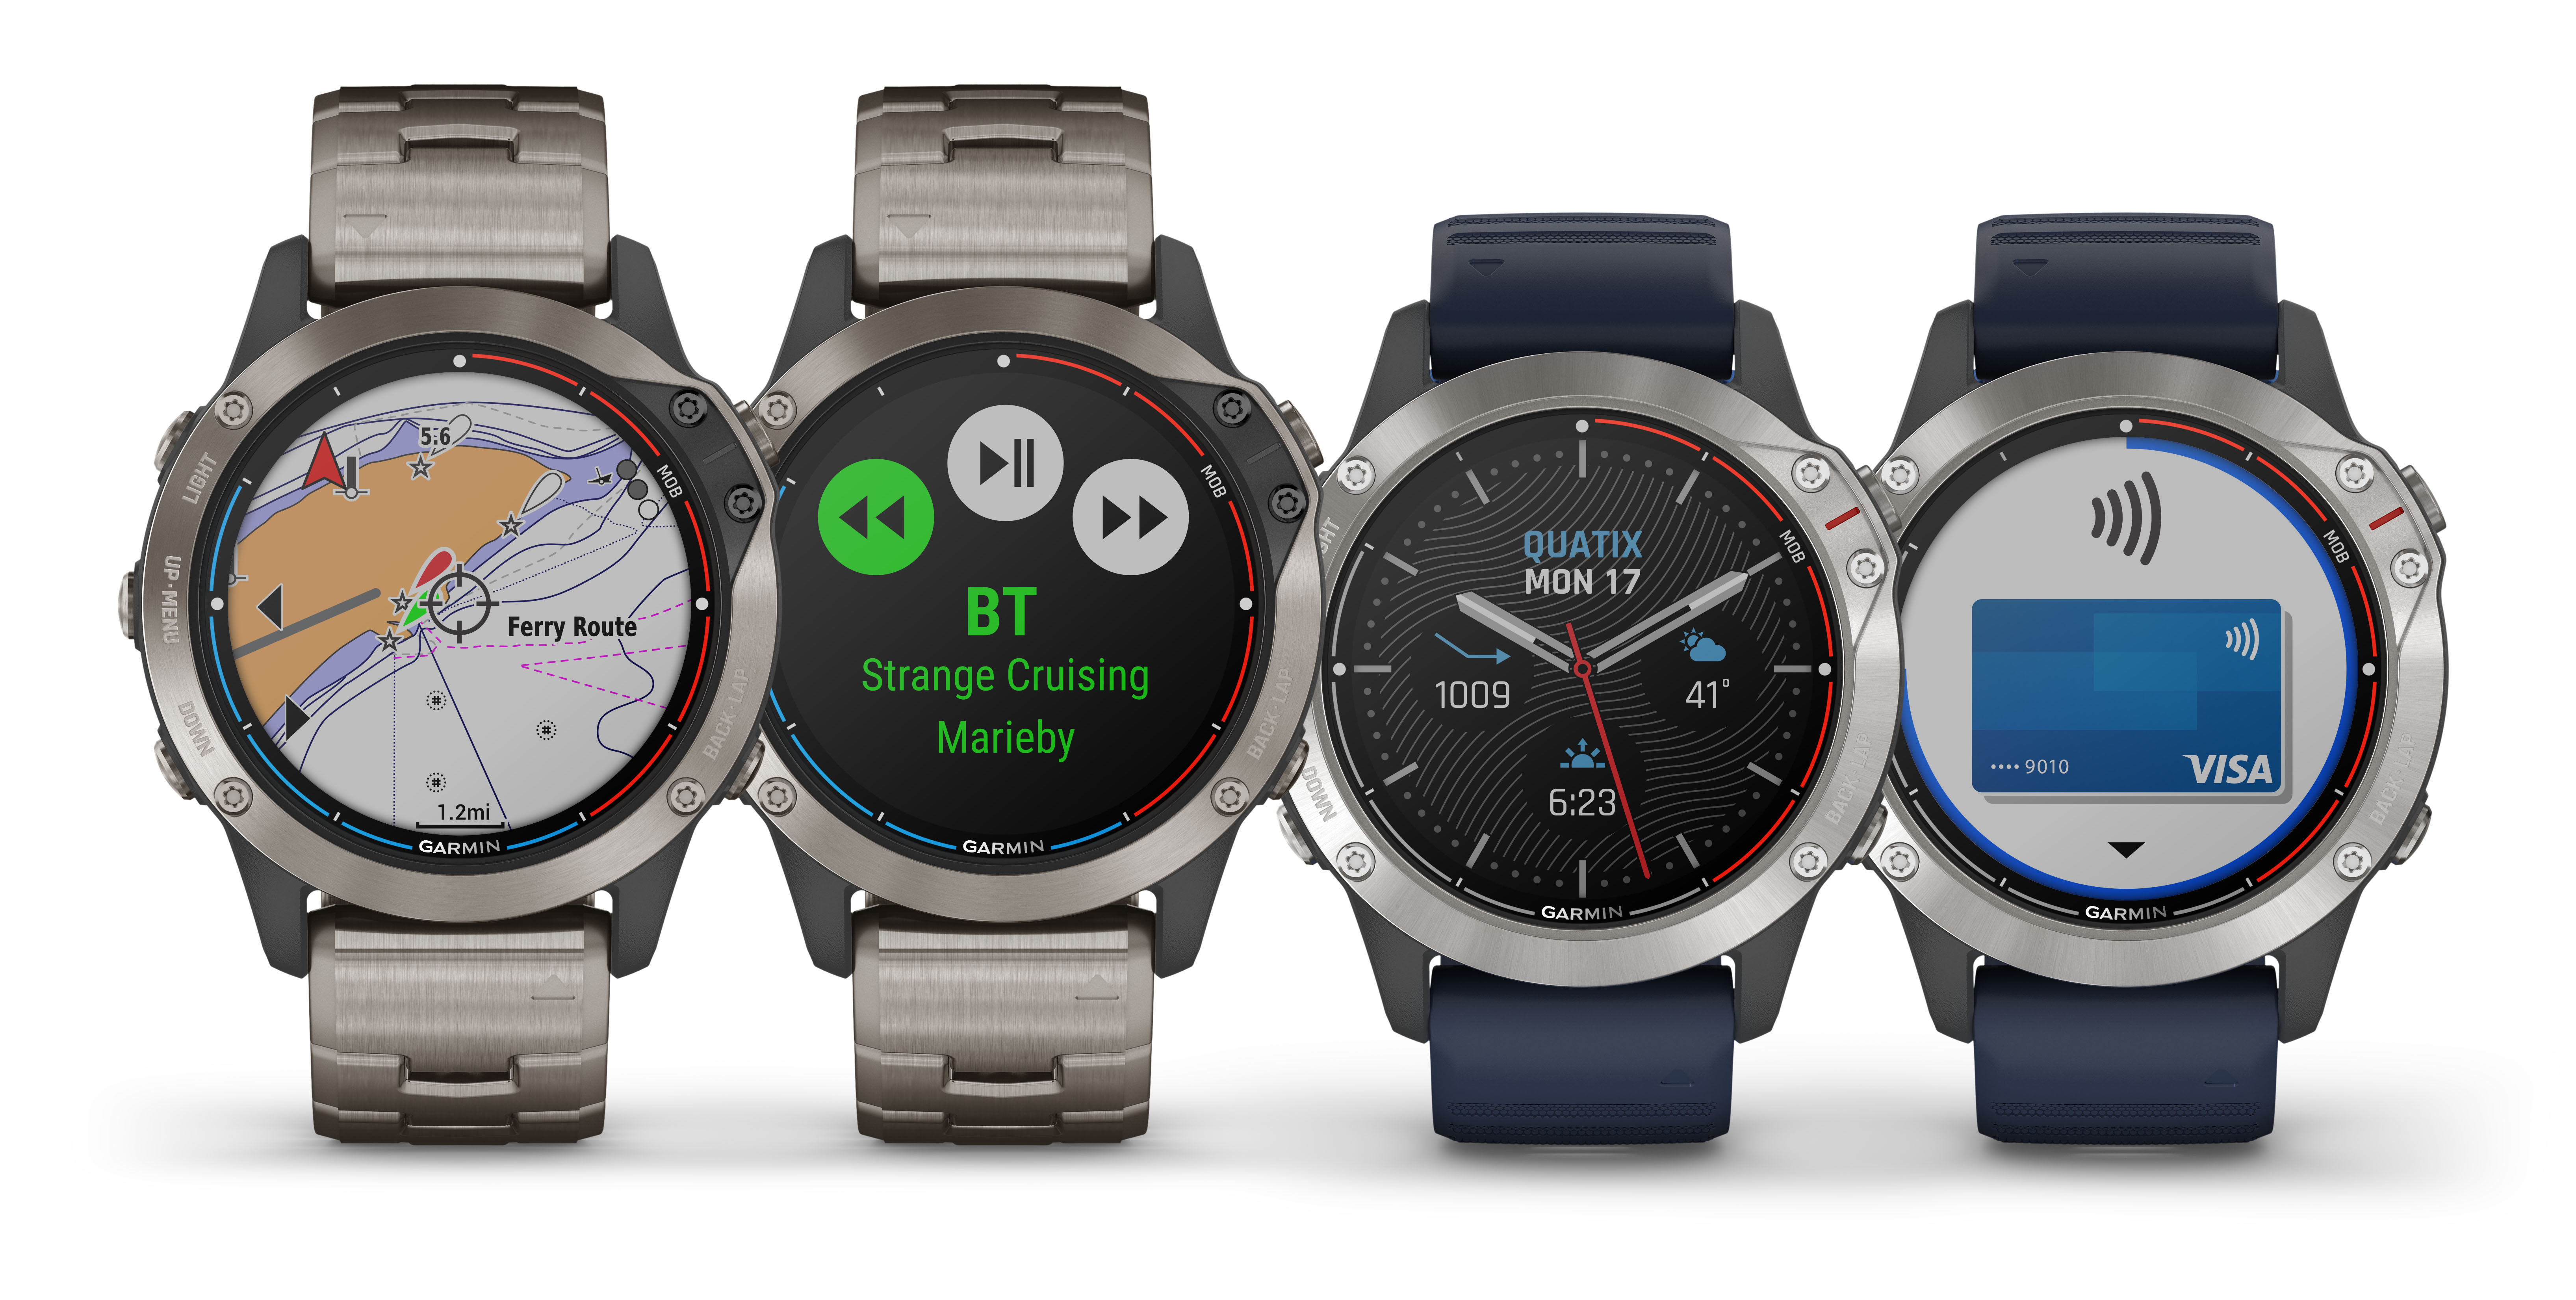 Garmin® introduces quatix® 6 marine smartwatch series with comprehensive connectivity, larger display and much more | Business Wire